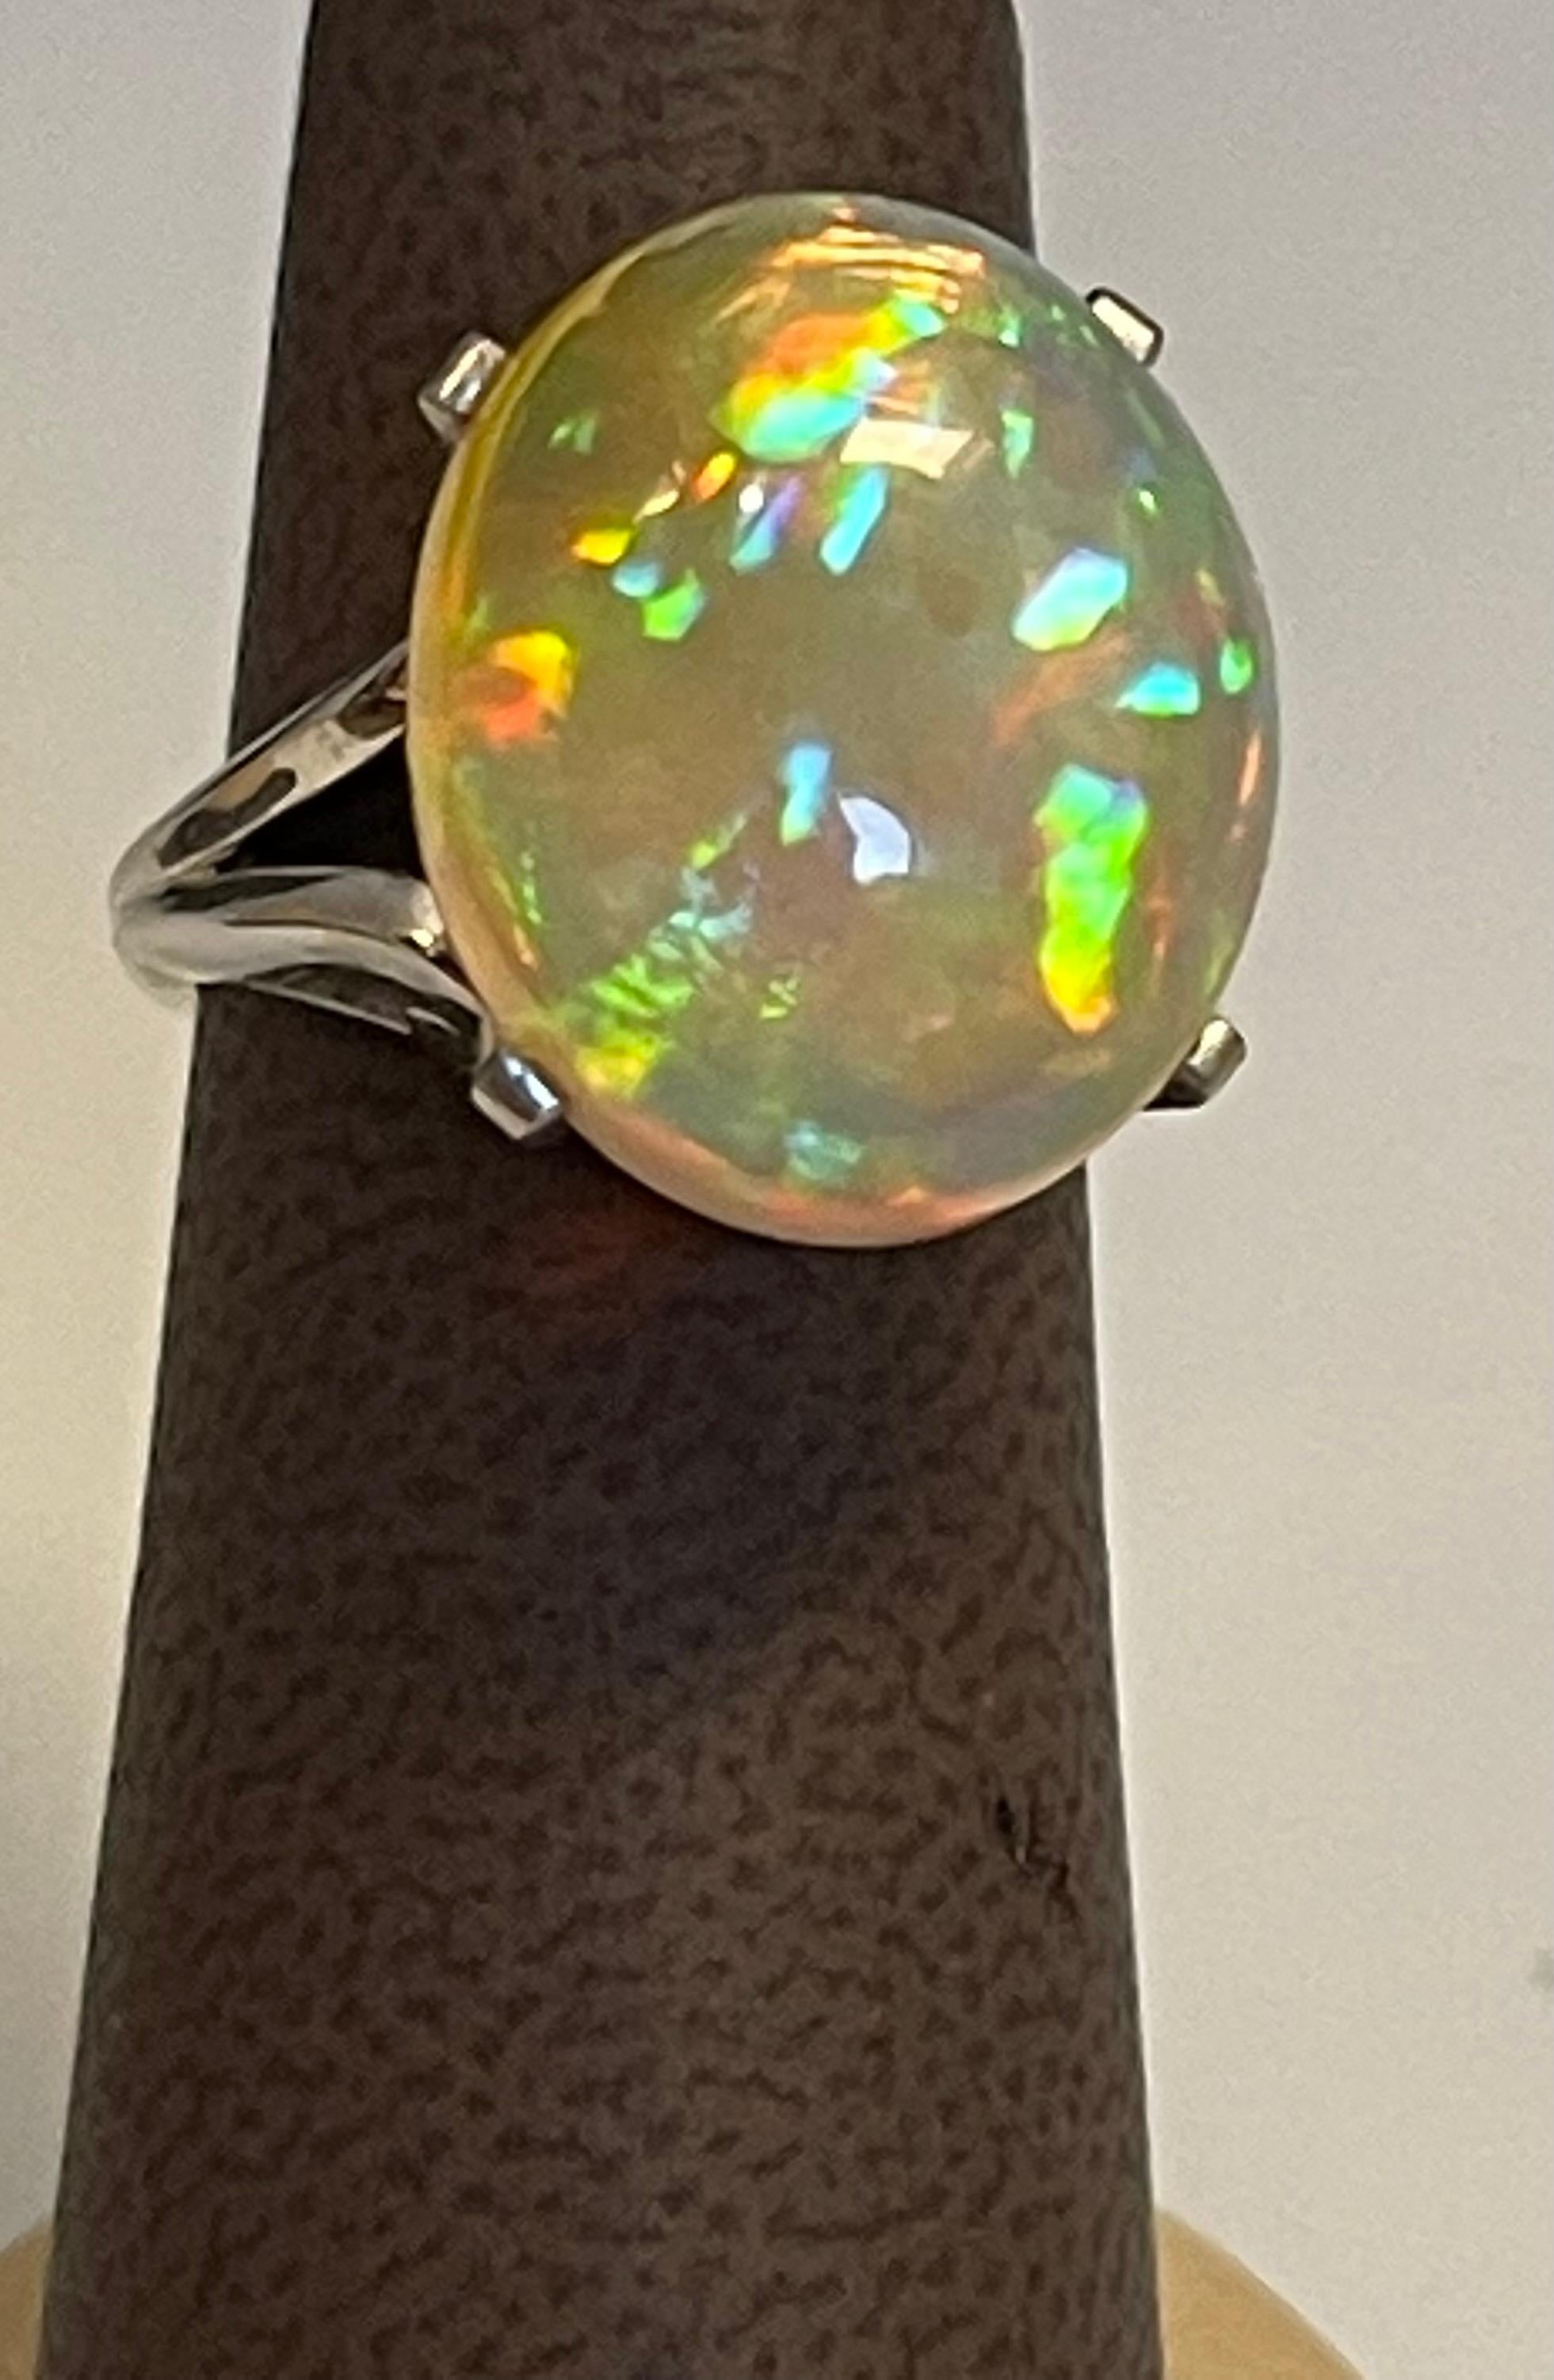 14 Carat Oval Shape Ethiopian Opal  Cocktail Ring in Platinum Size 6
Oval  Natural Opal  A classic, Cocktail ring 
Estate
Size of the opal 14X10X6 MM, Approximately 14 ct

Huge Opal clean and Good quality  in Oval in shape , luster and shine is